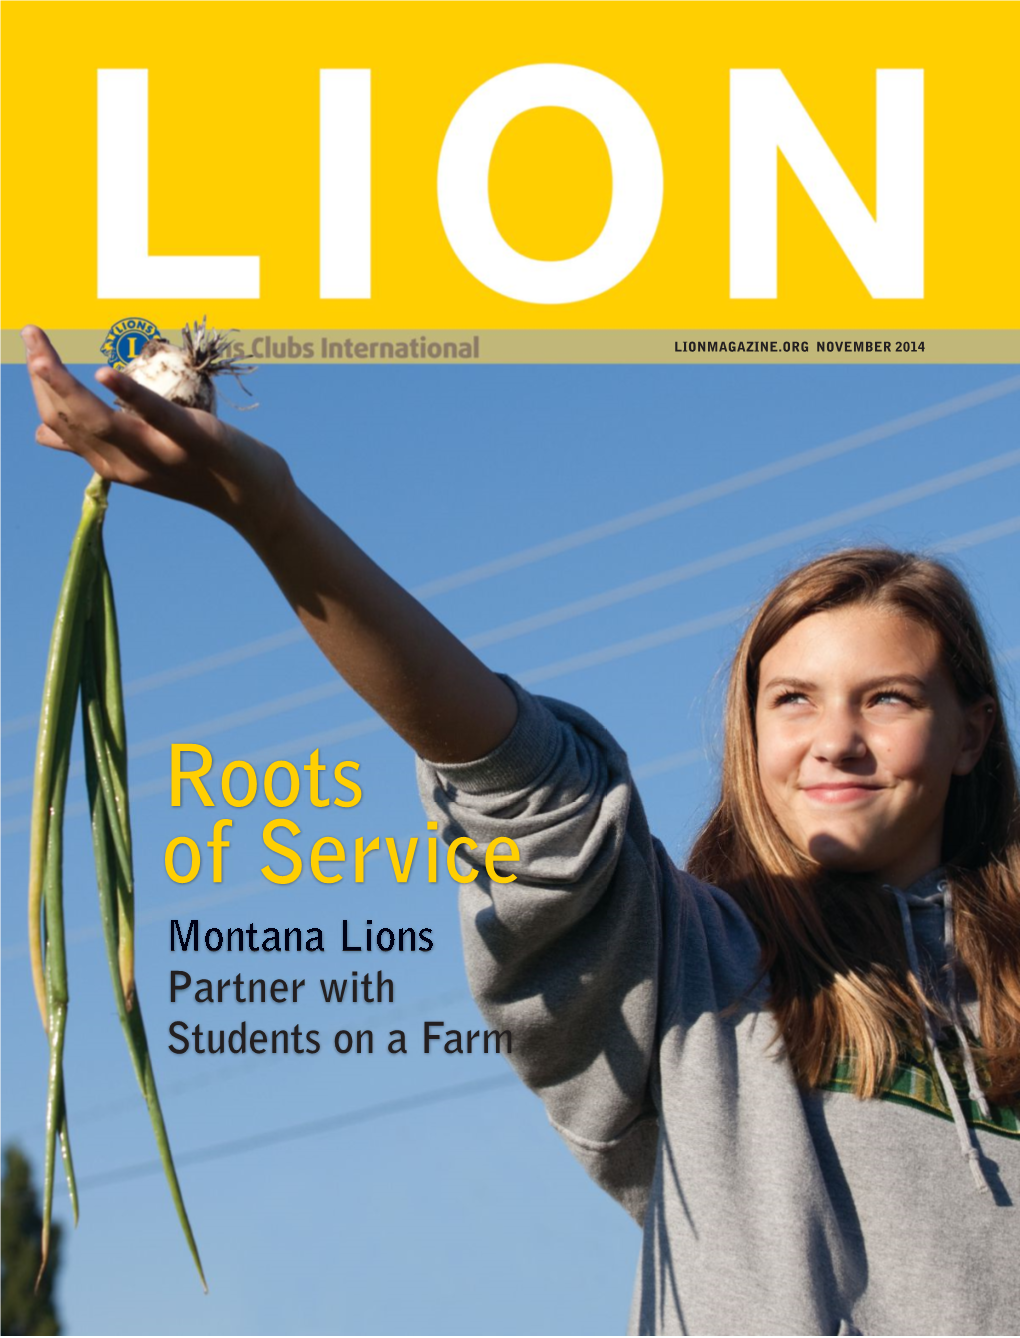 Roots of Service Montana Lions Partner with Students on a Farm Finally! a Help Button That Can Automatically Call for Help